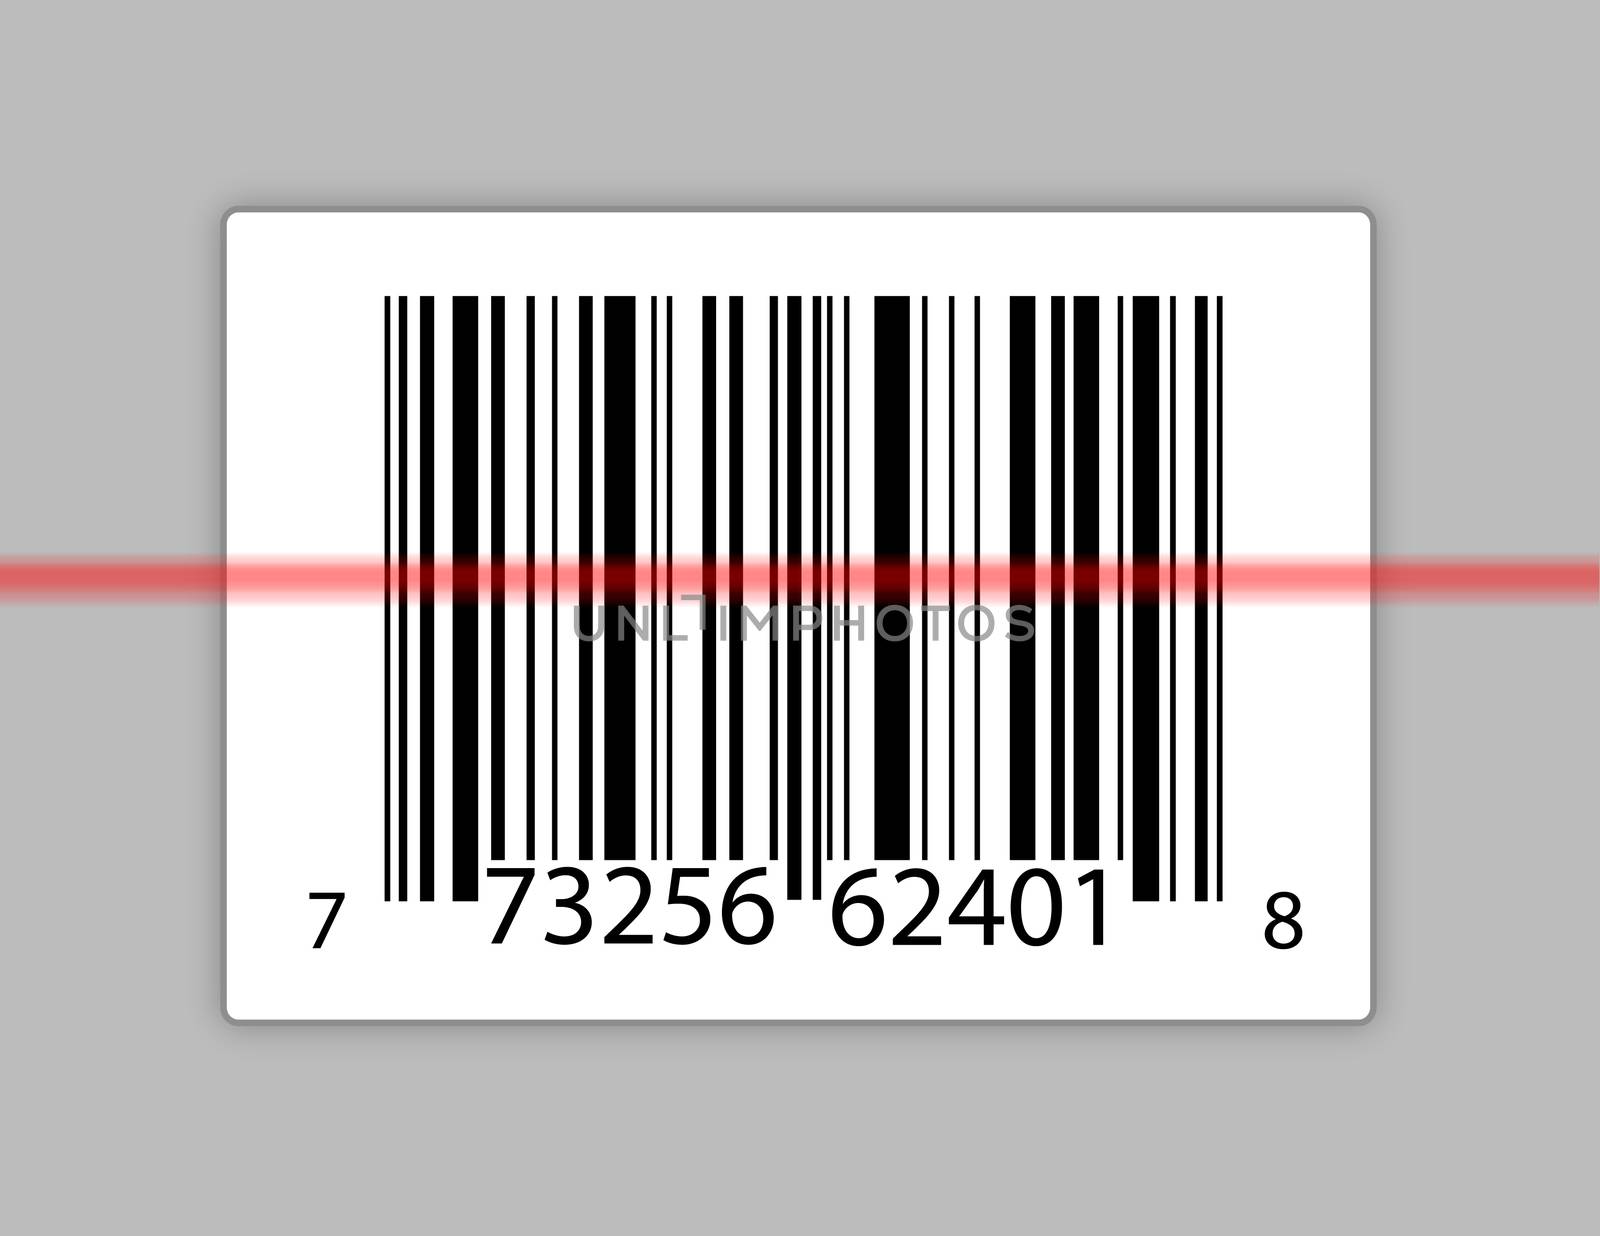 A typical product barcode with a laser scanning it.